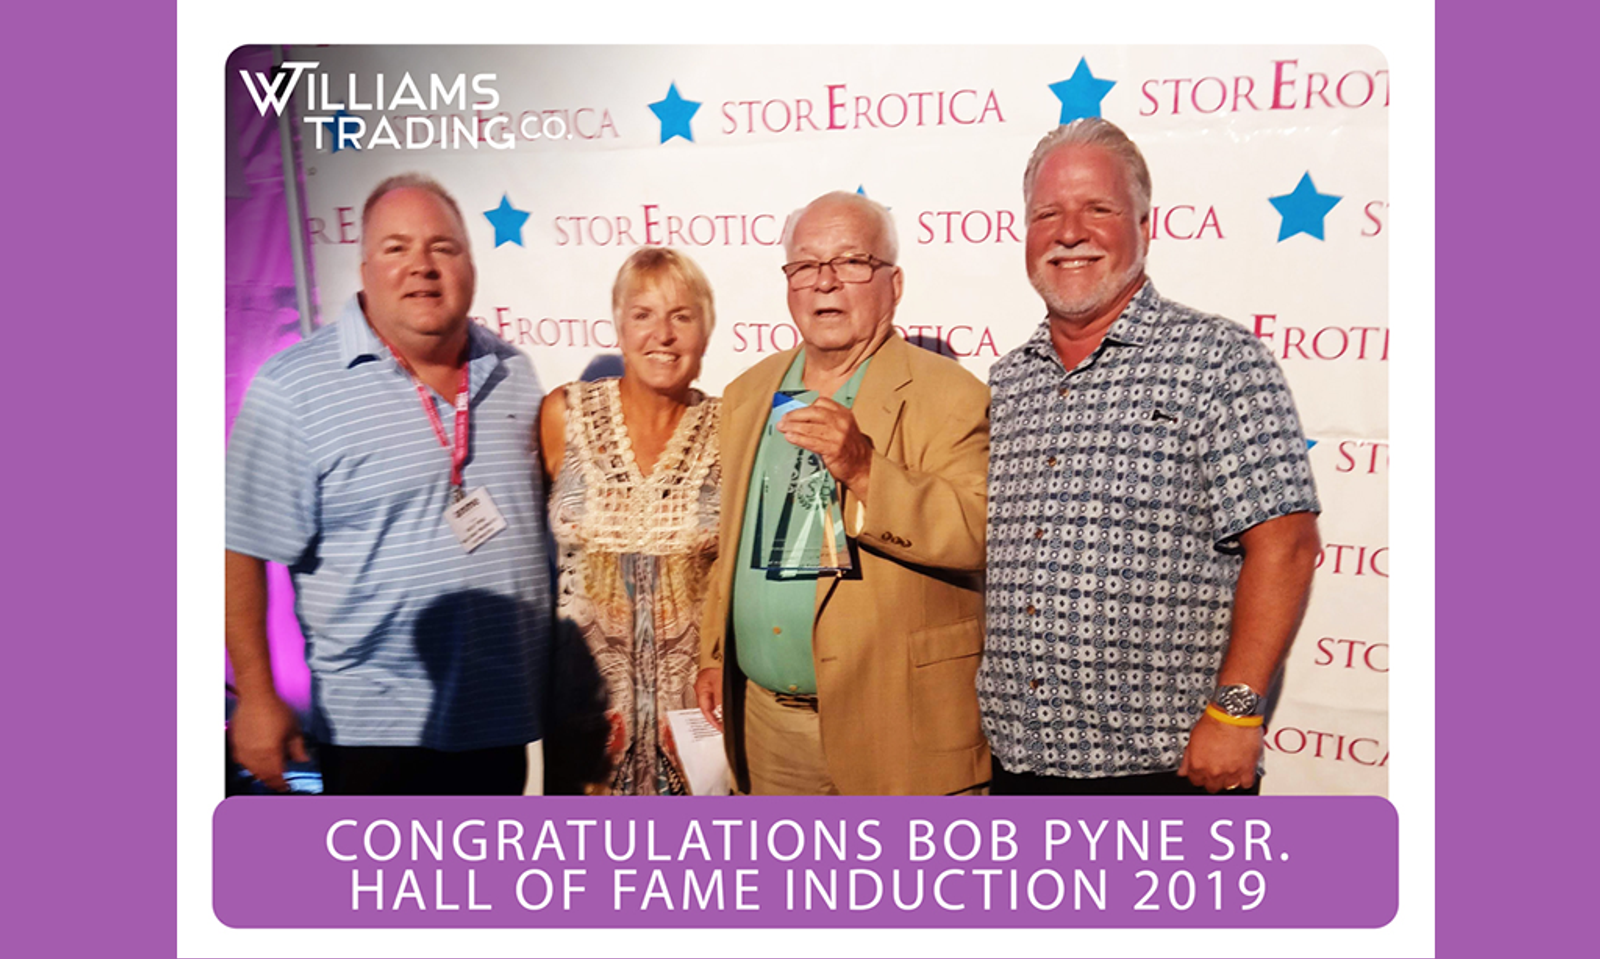 Williams Trading's Bob Pyne Sr. Inducted Into StorErotica HoF